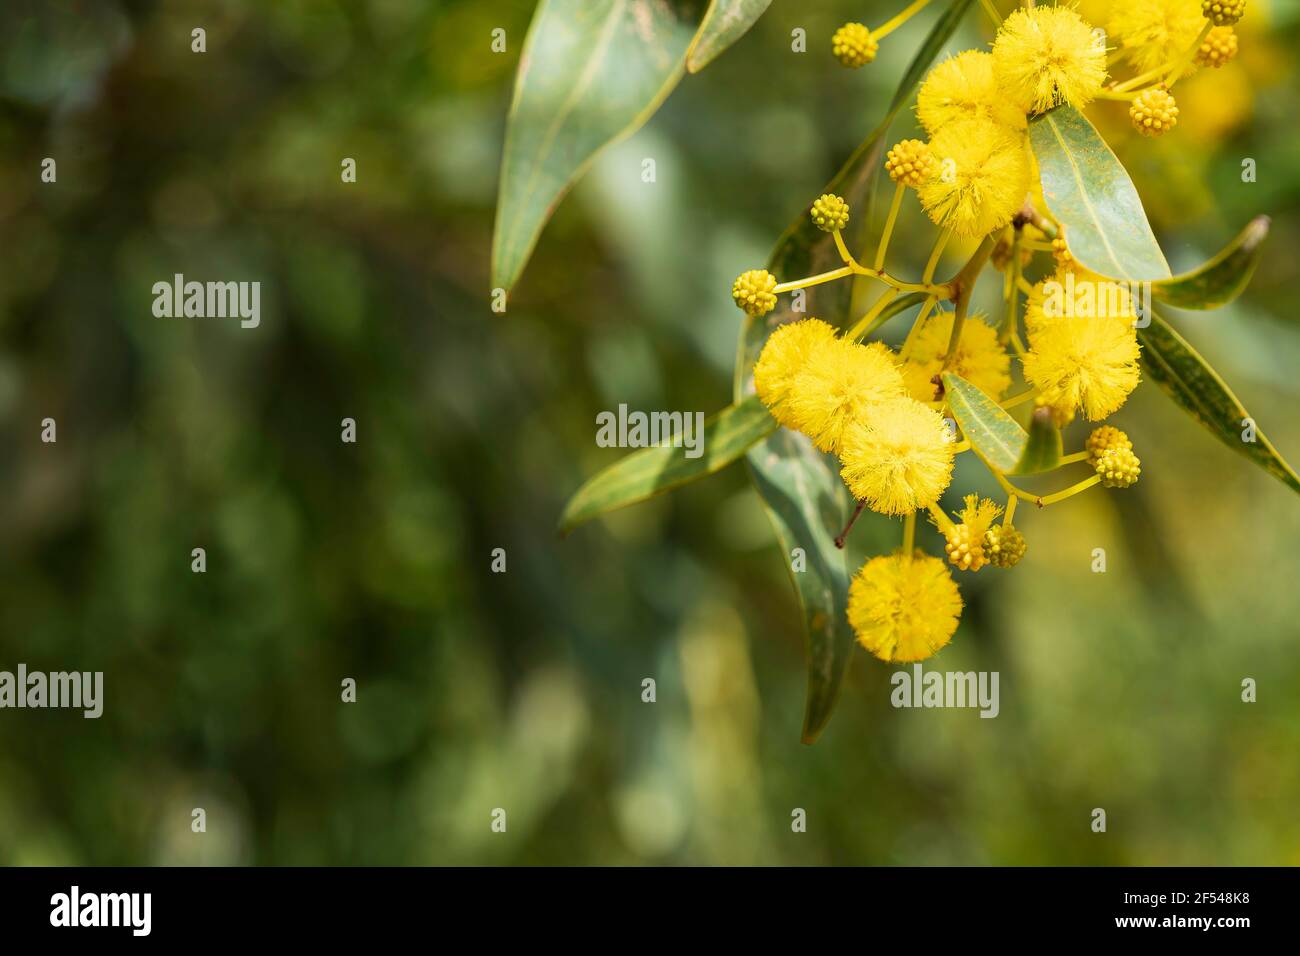 Yellow flowers of acacia saligna Golden Wreath Wattle tree close-up on blurred green background Stock Photo